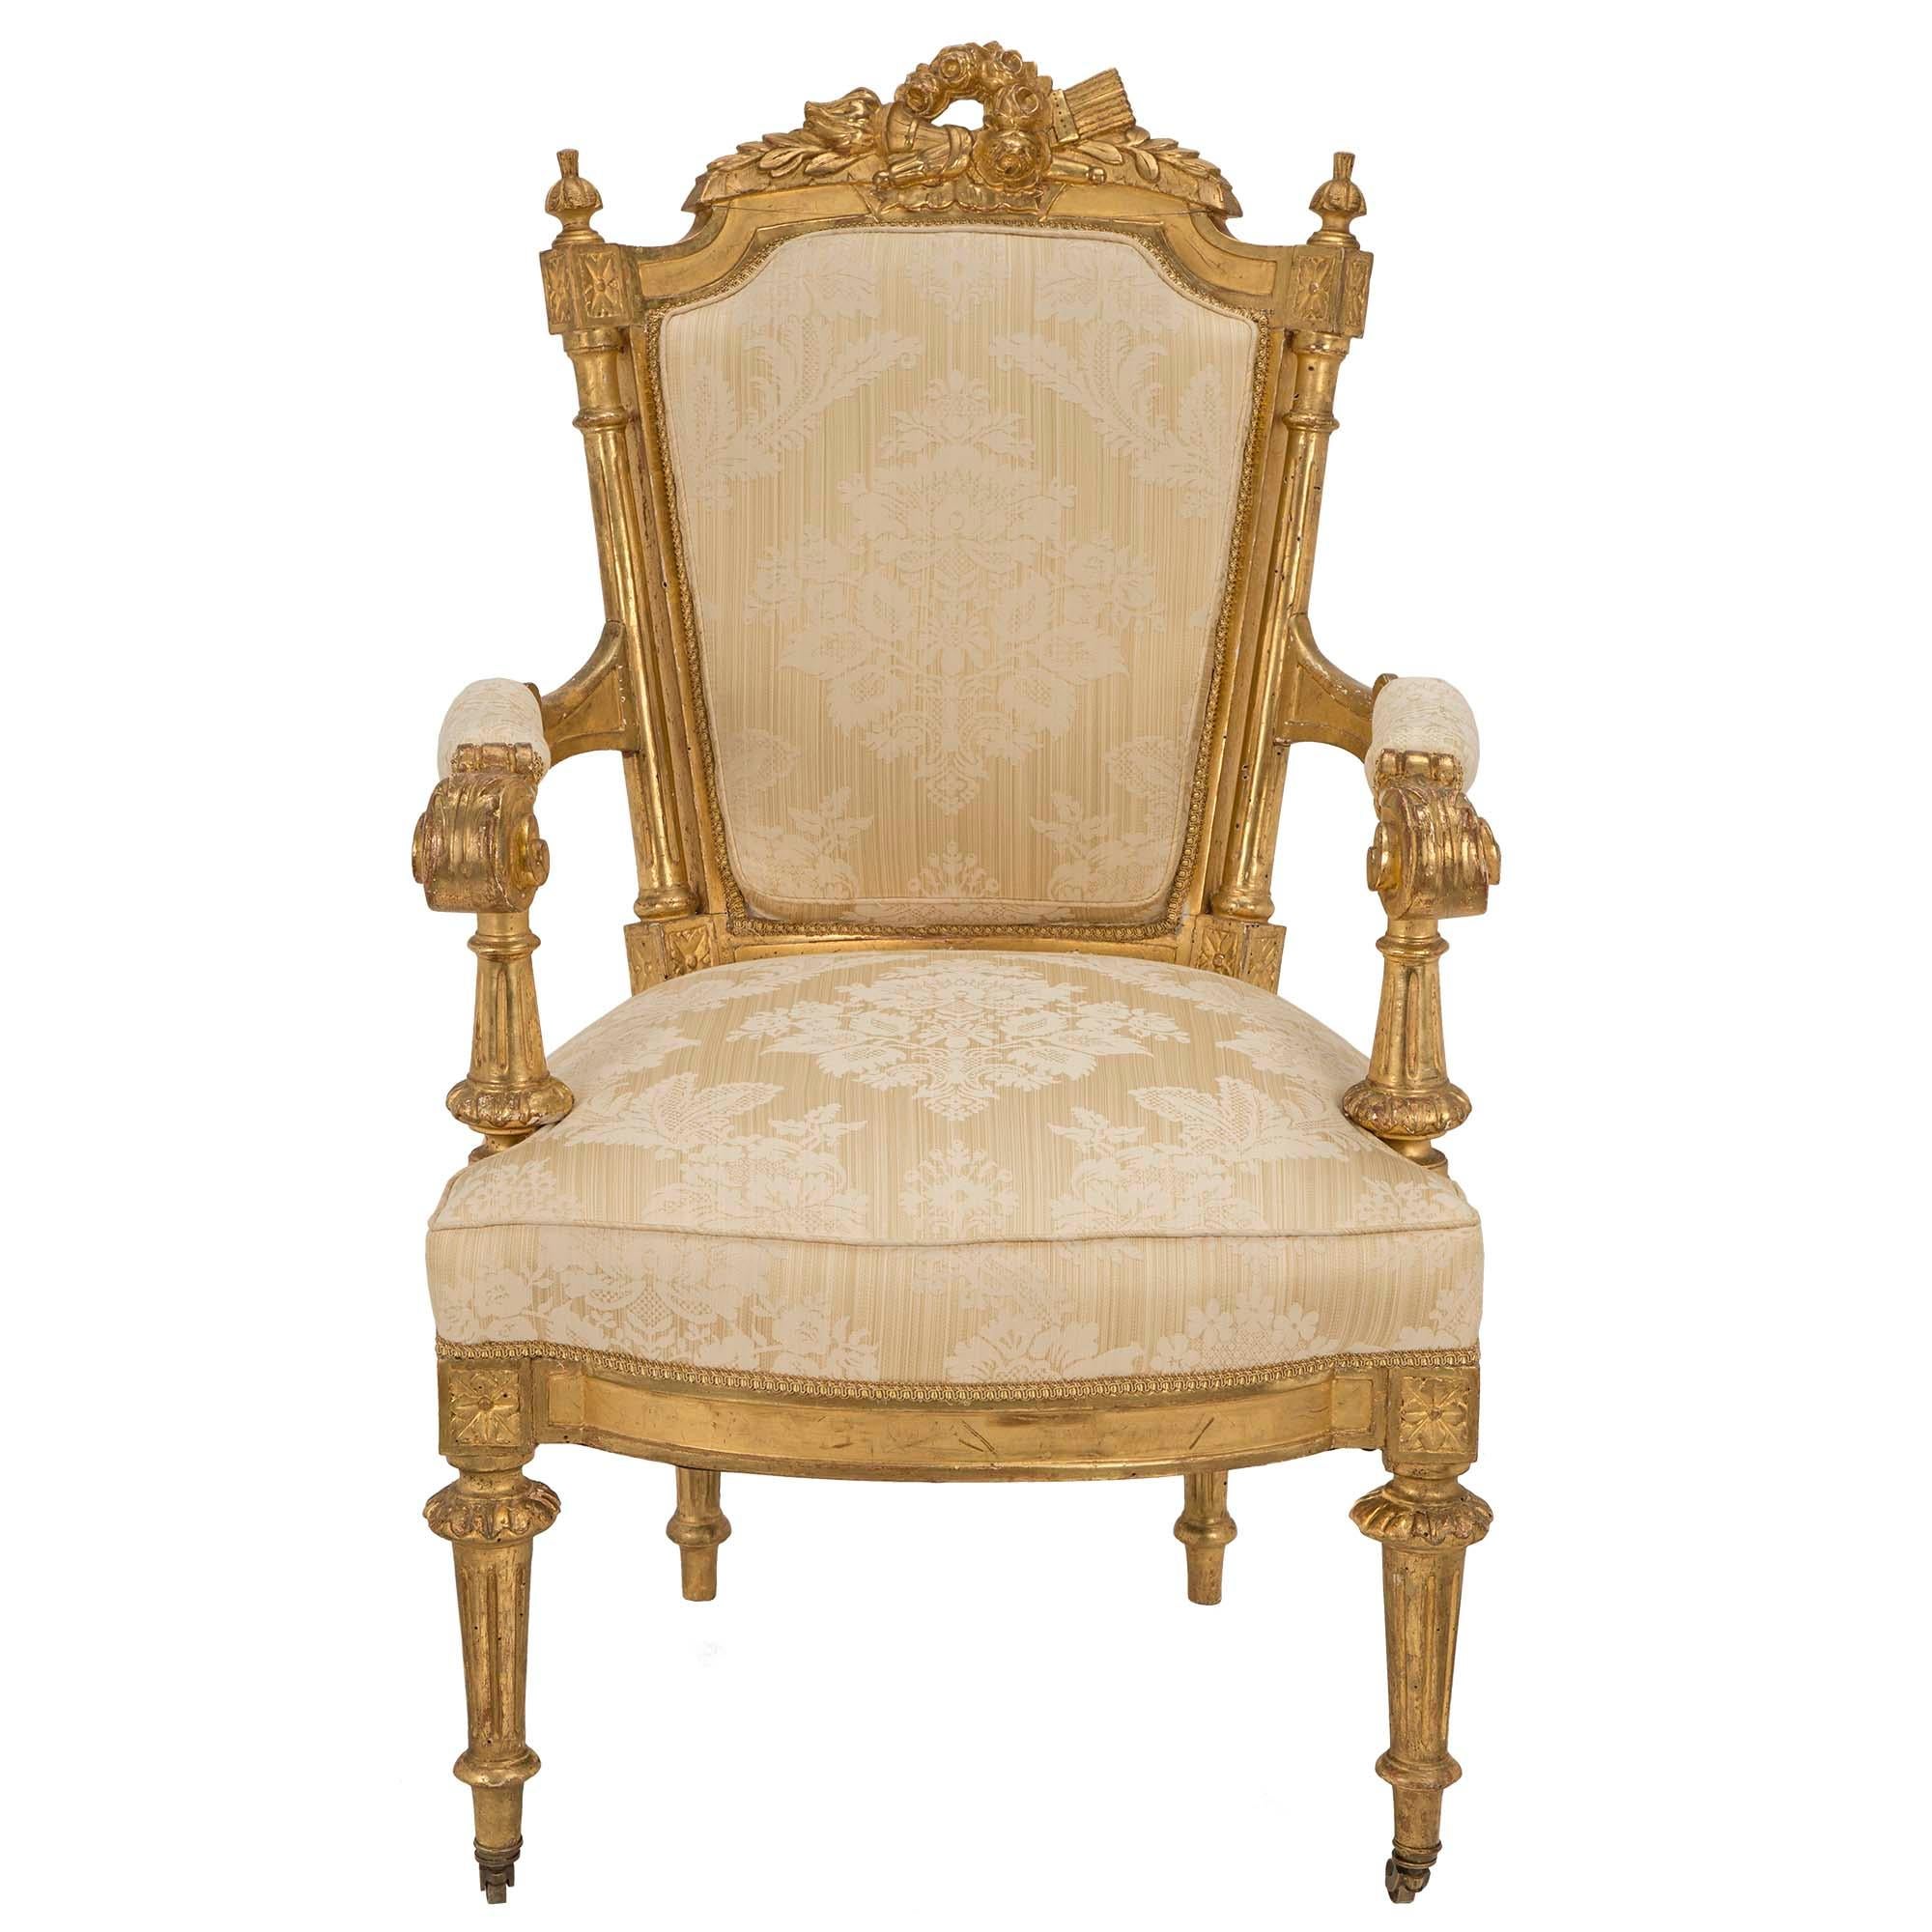 A spectacular and complete set of twelve Italian early 19th century Louis XVI st. giltwood dining chairs. Each seat is raised on tapered fluted legs with brass castors on the front and a foliate surround at the top. The generous sized seat, with